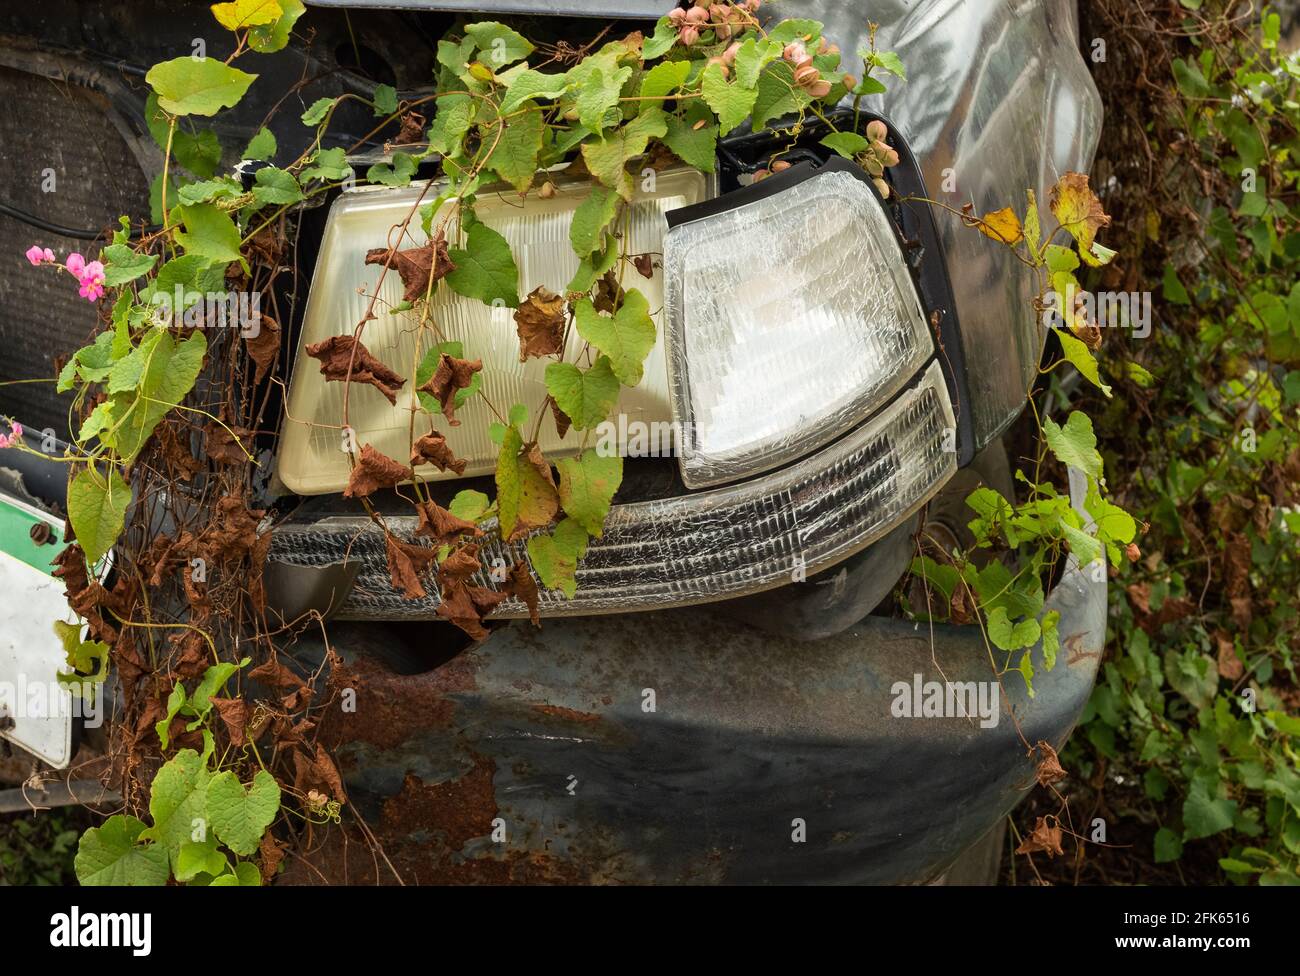 Abandoned wrecked car overgrown with plants, close up. Stock Photo